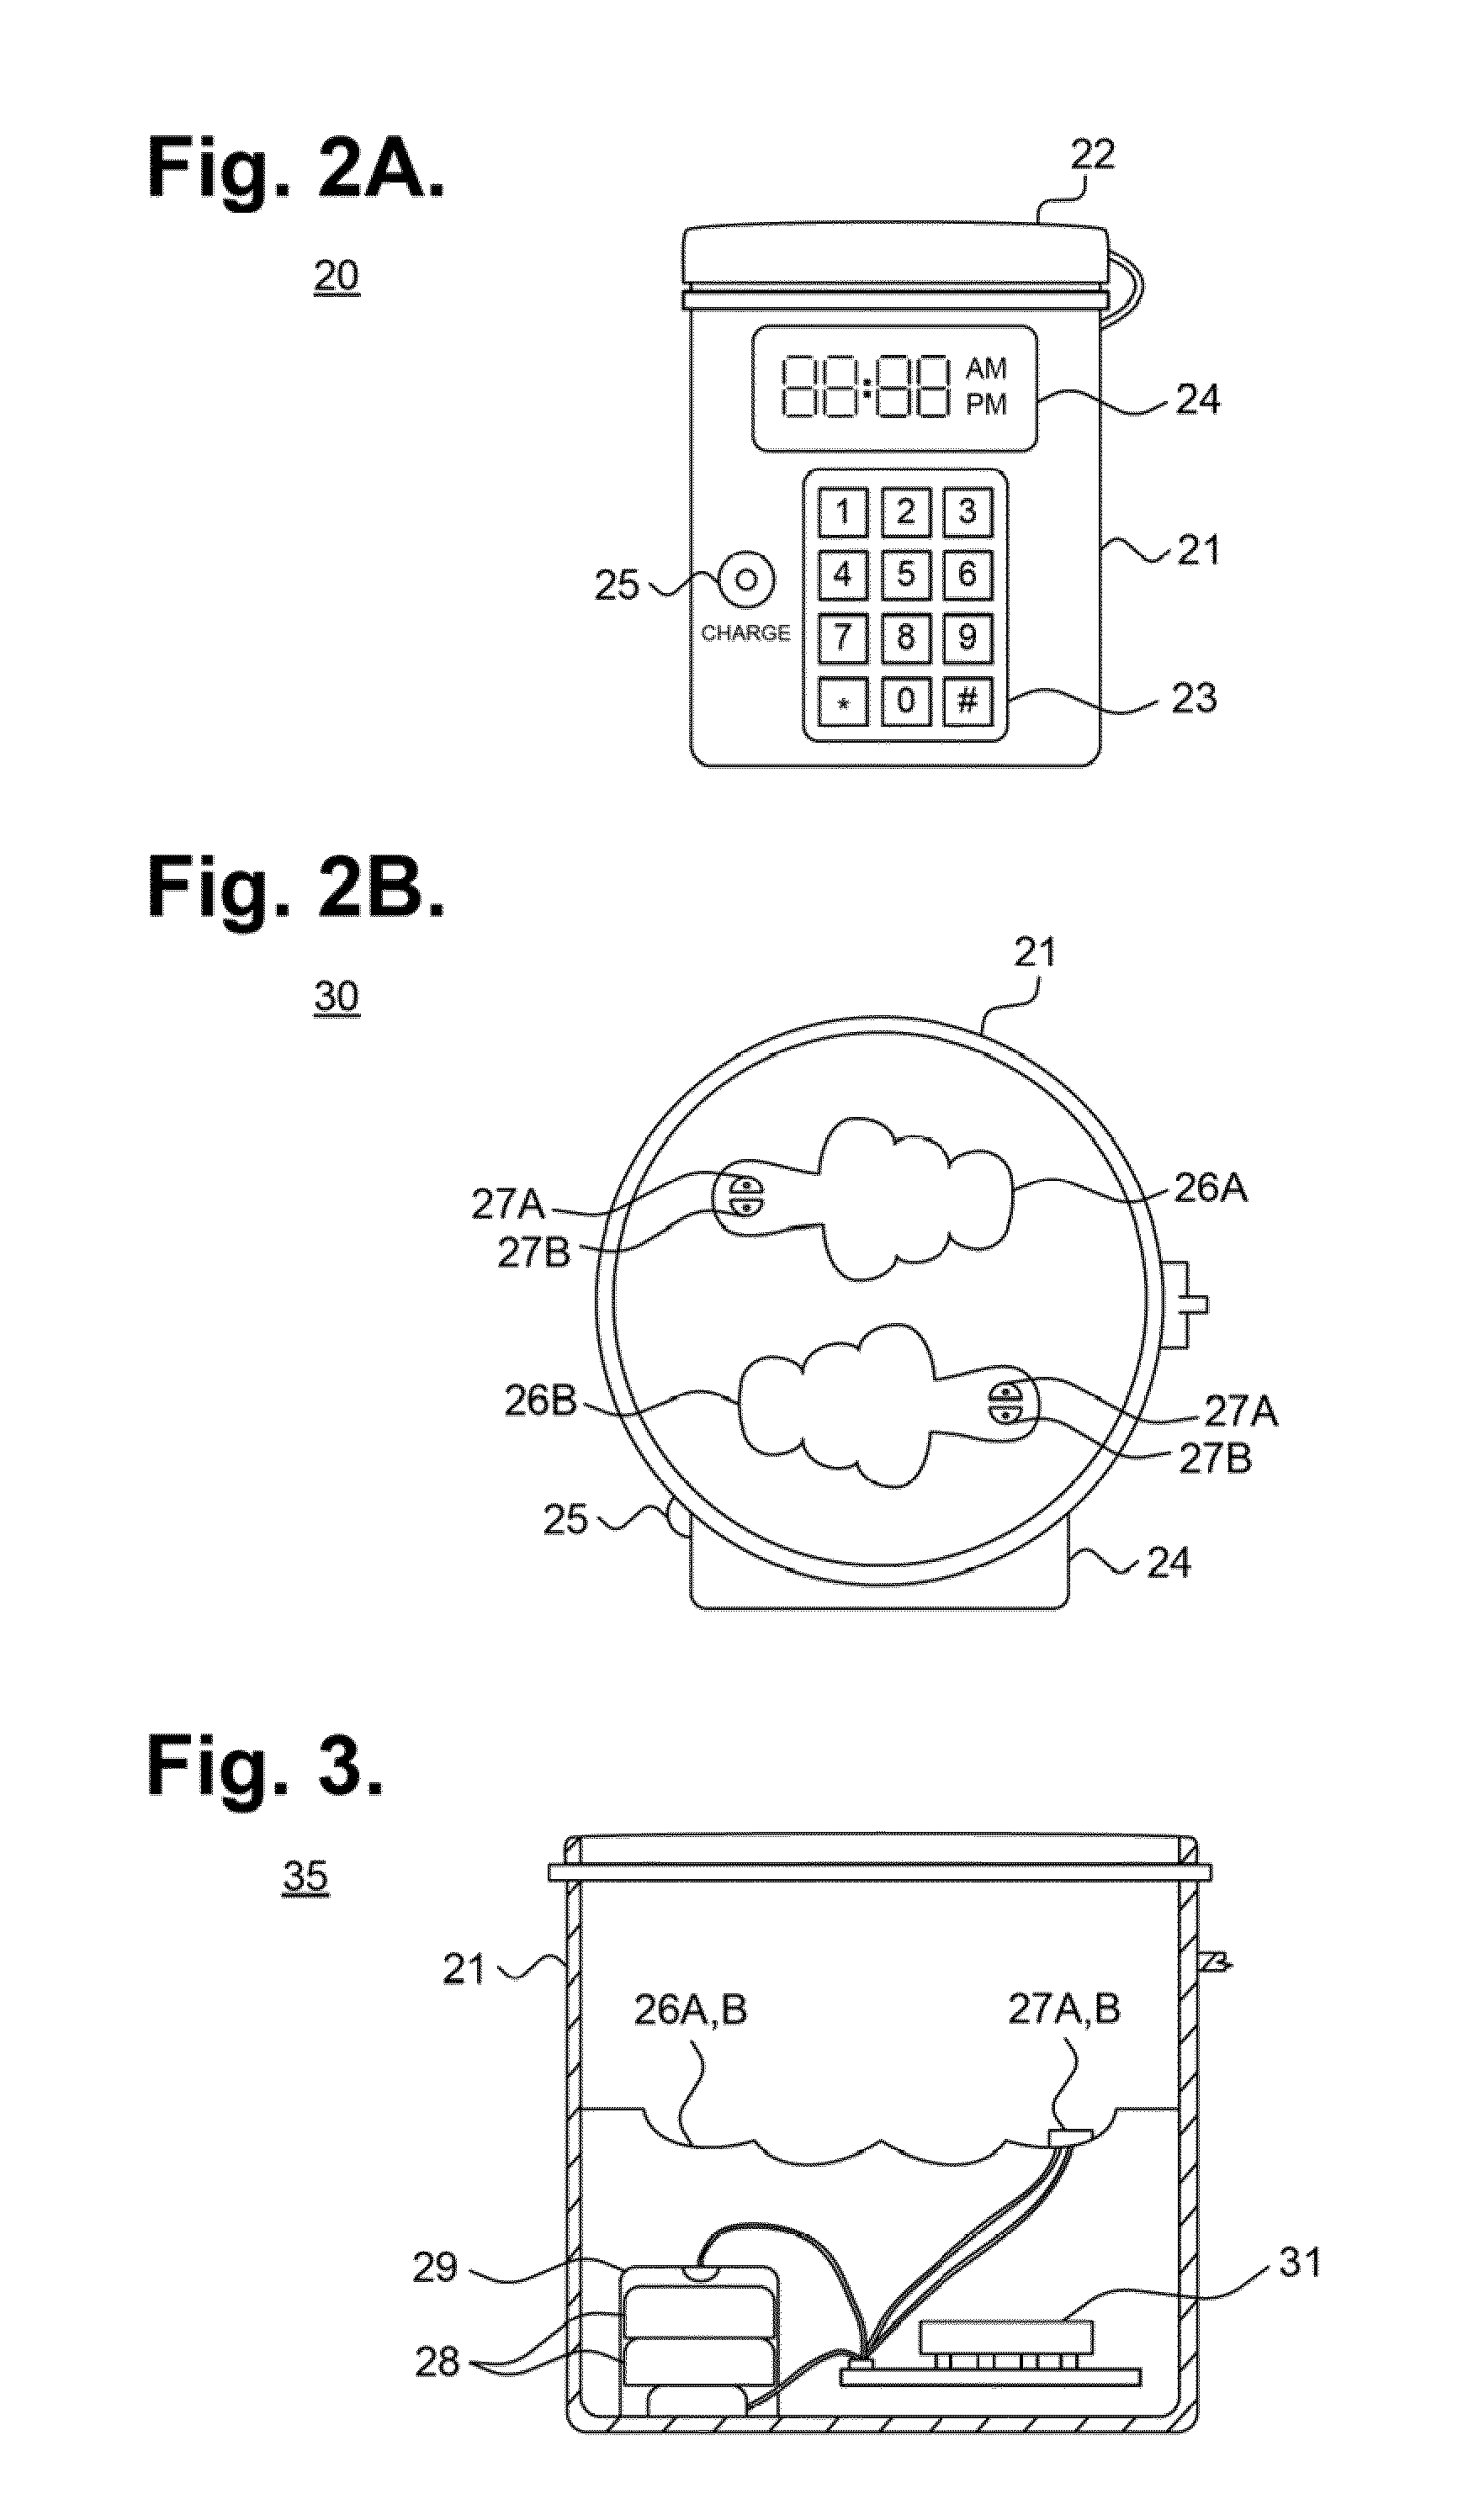 Wearable wireless ear plug for providing a downloadable programmable personal alarm and method of construction